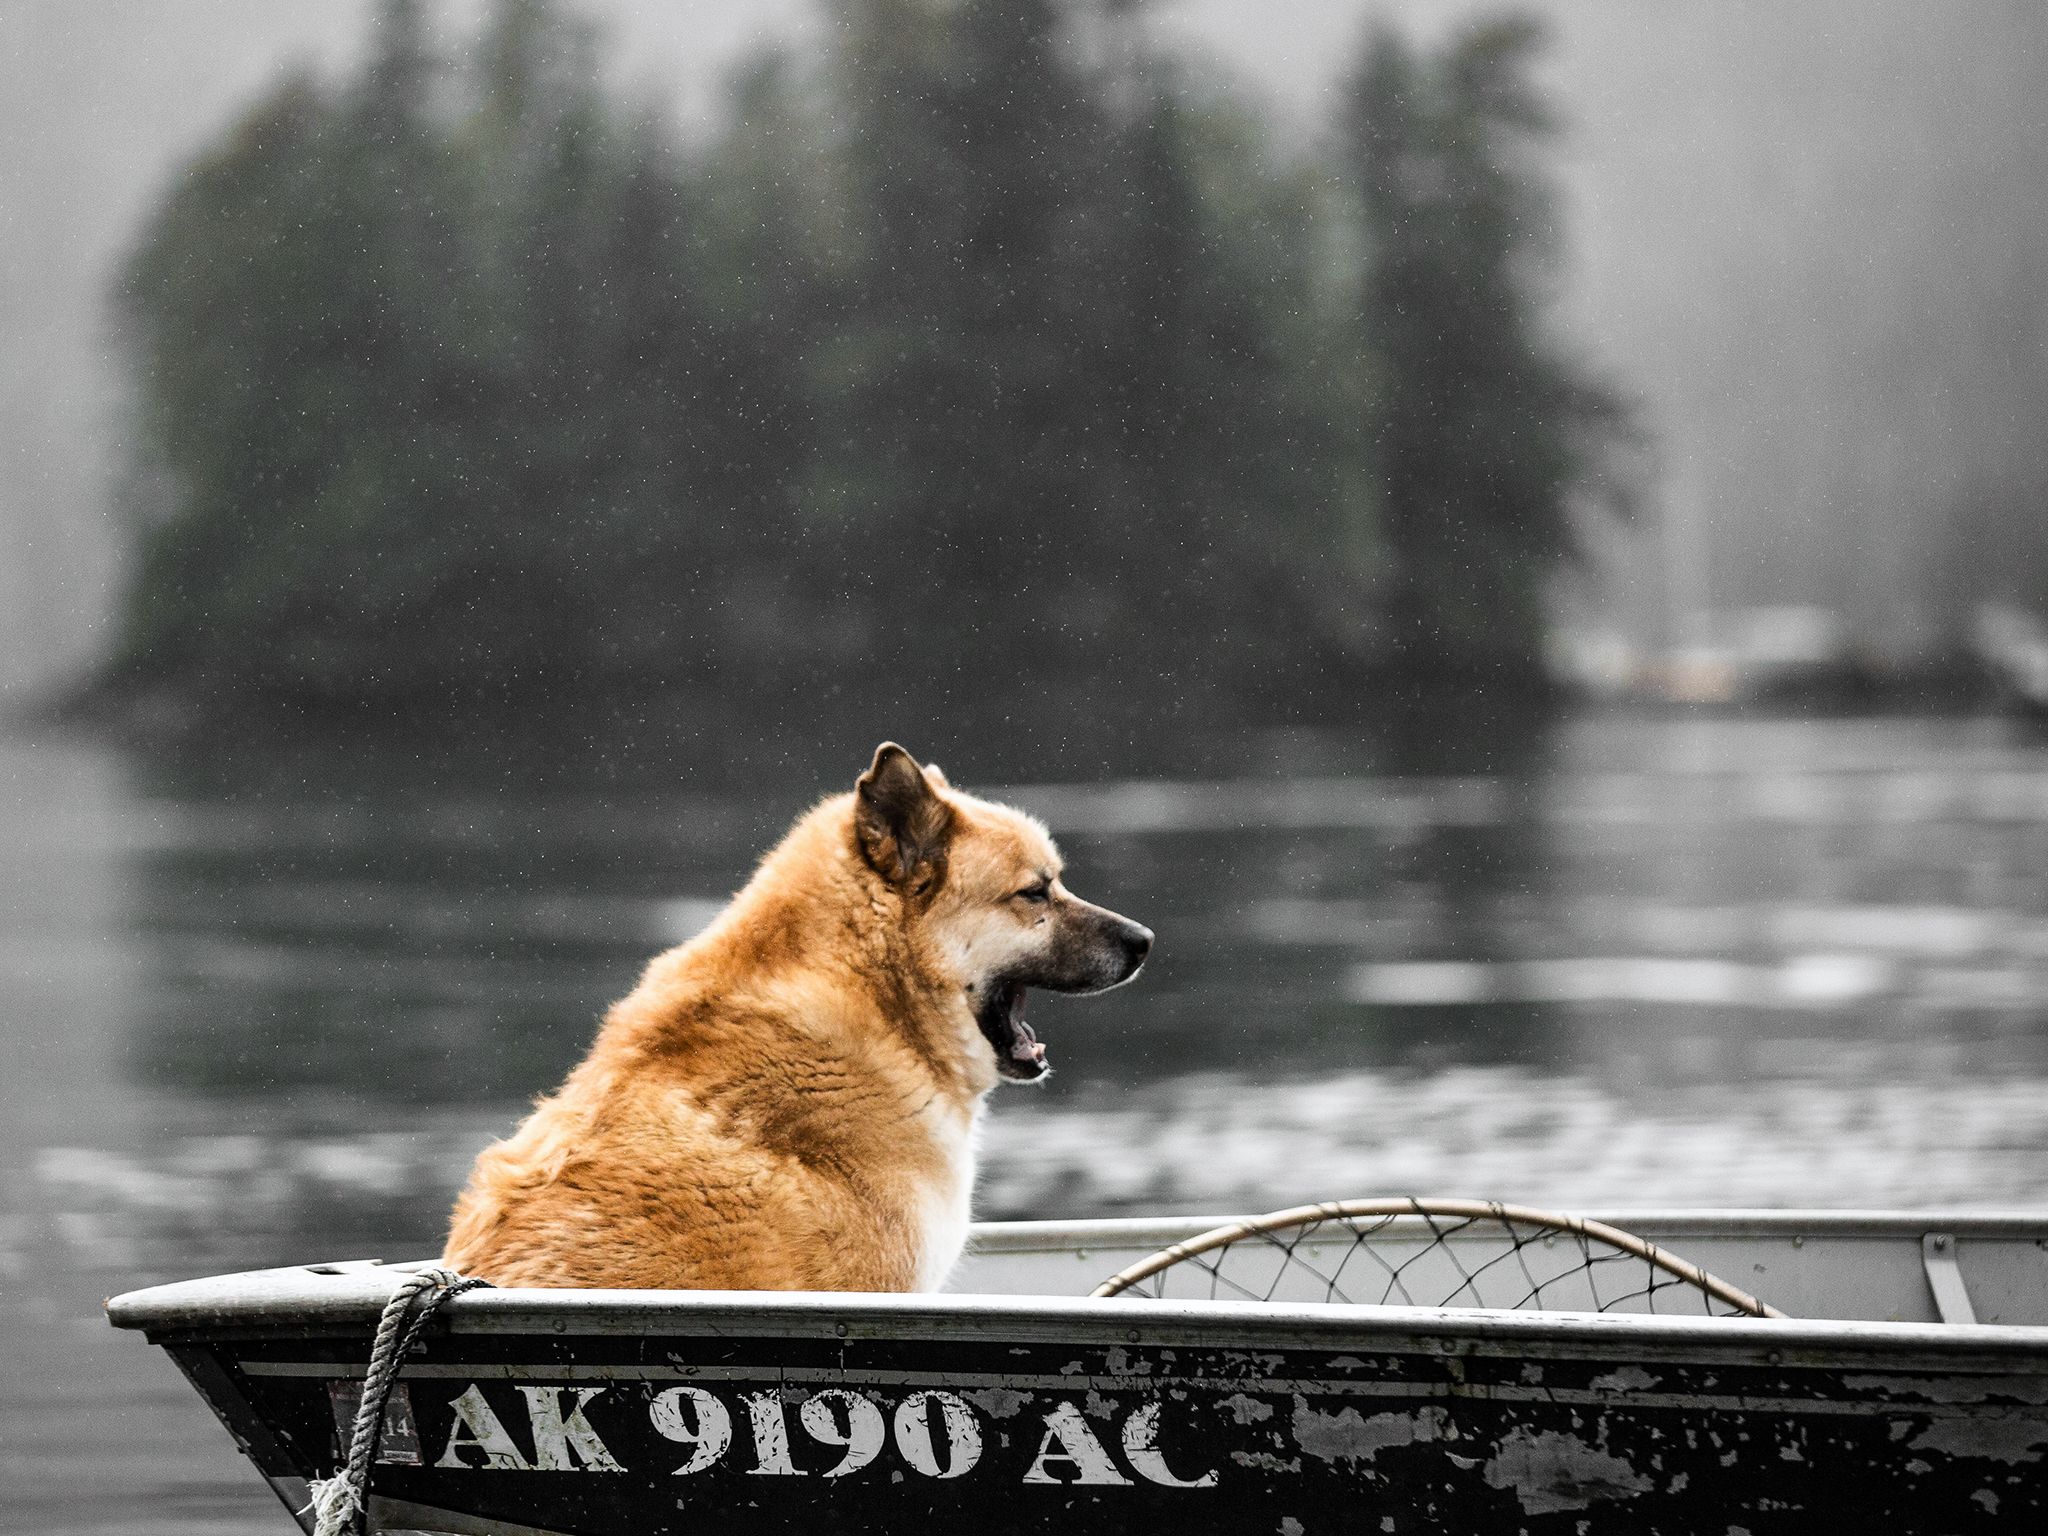 Port Protection, Alaska: Gary's dog, Trapper, sits in the boat. This image is from Port Protection. [Photo of the day - November 2015]